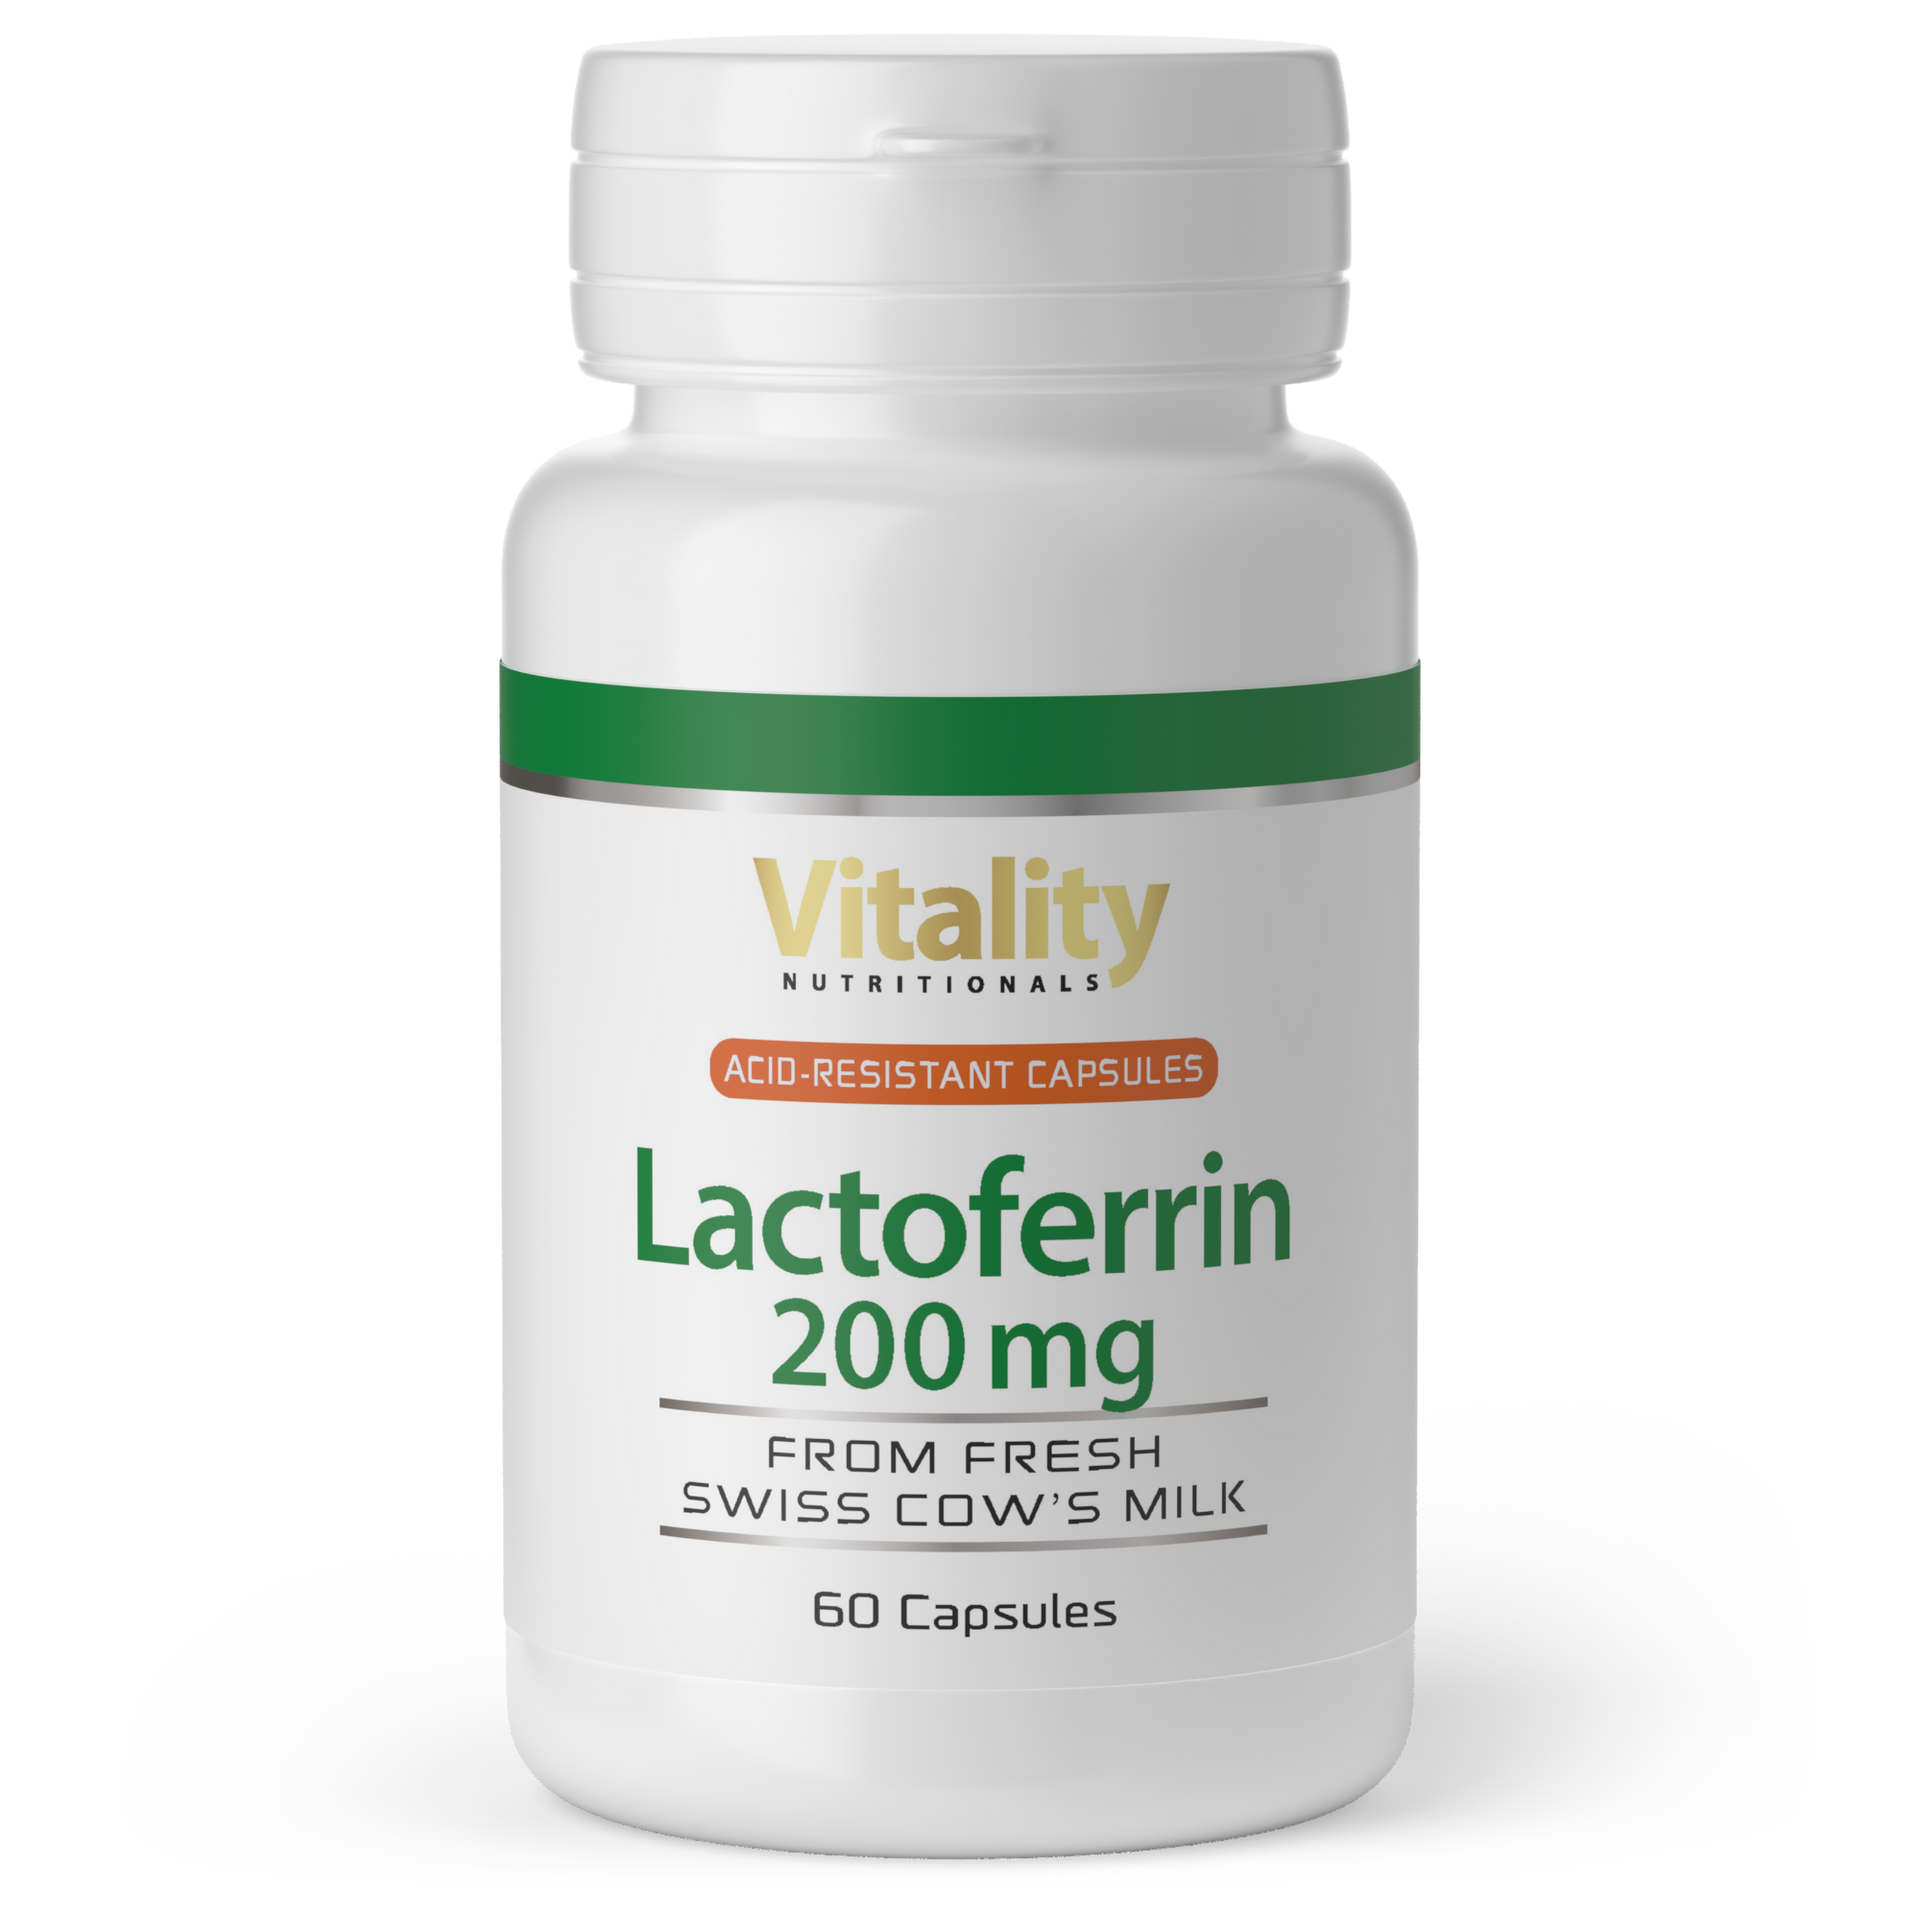 080-4844-Lactoferrin_200mg-front (1).png